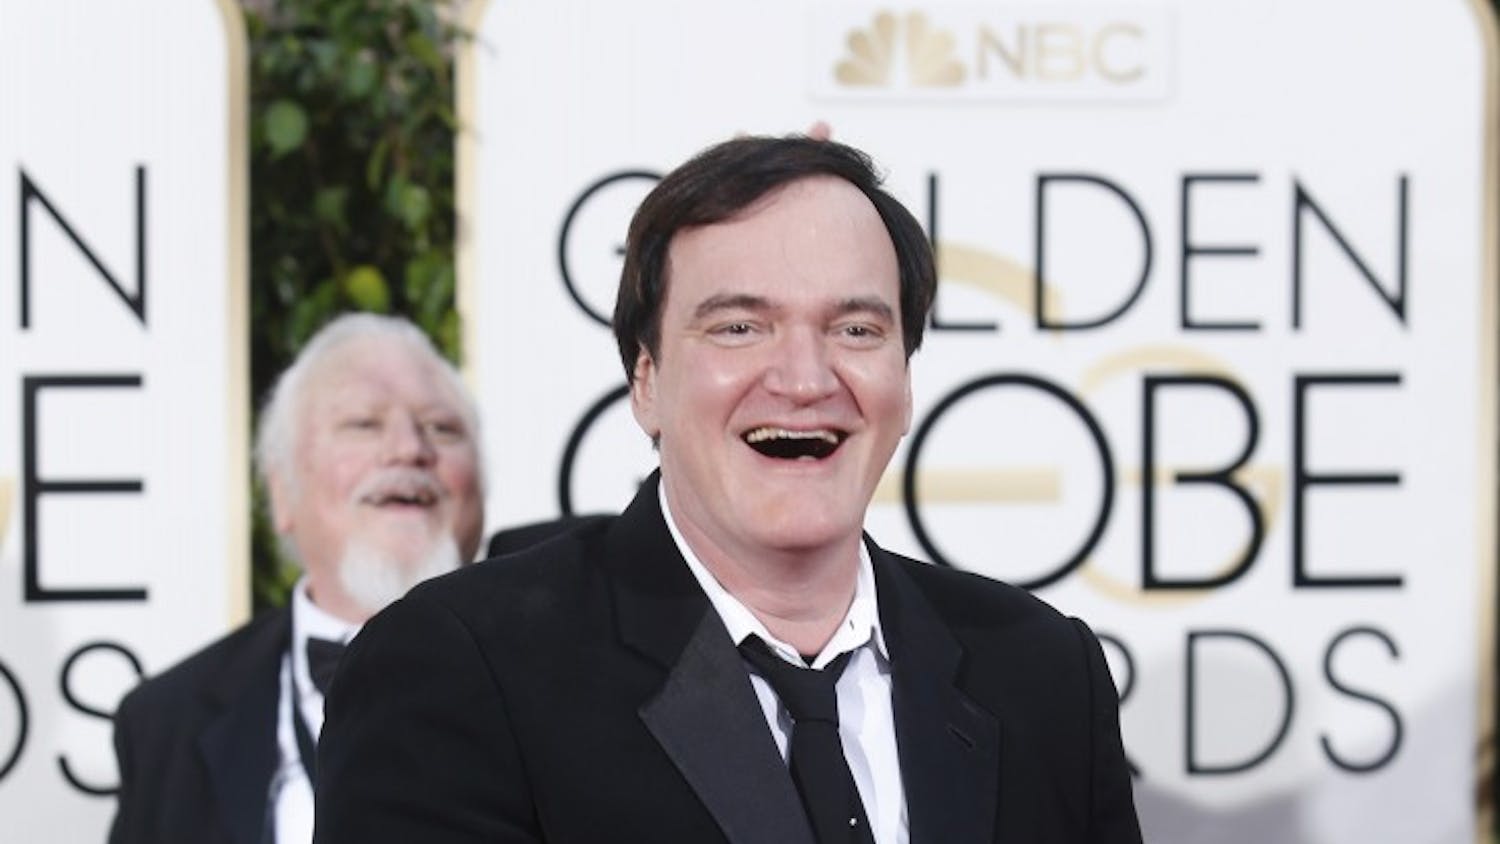 Quentin Tarantino arrives at the 73rd Annual Golden Globe Awards show at the Beverly Hilton Hotel in Beverly Hills, Calif., on Sunday, Jan. 10, 2016. (Wally Skalij/Los Angeles Times/TNS)